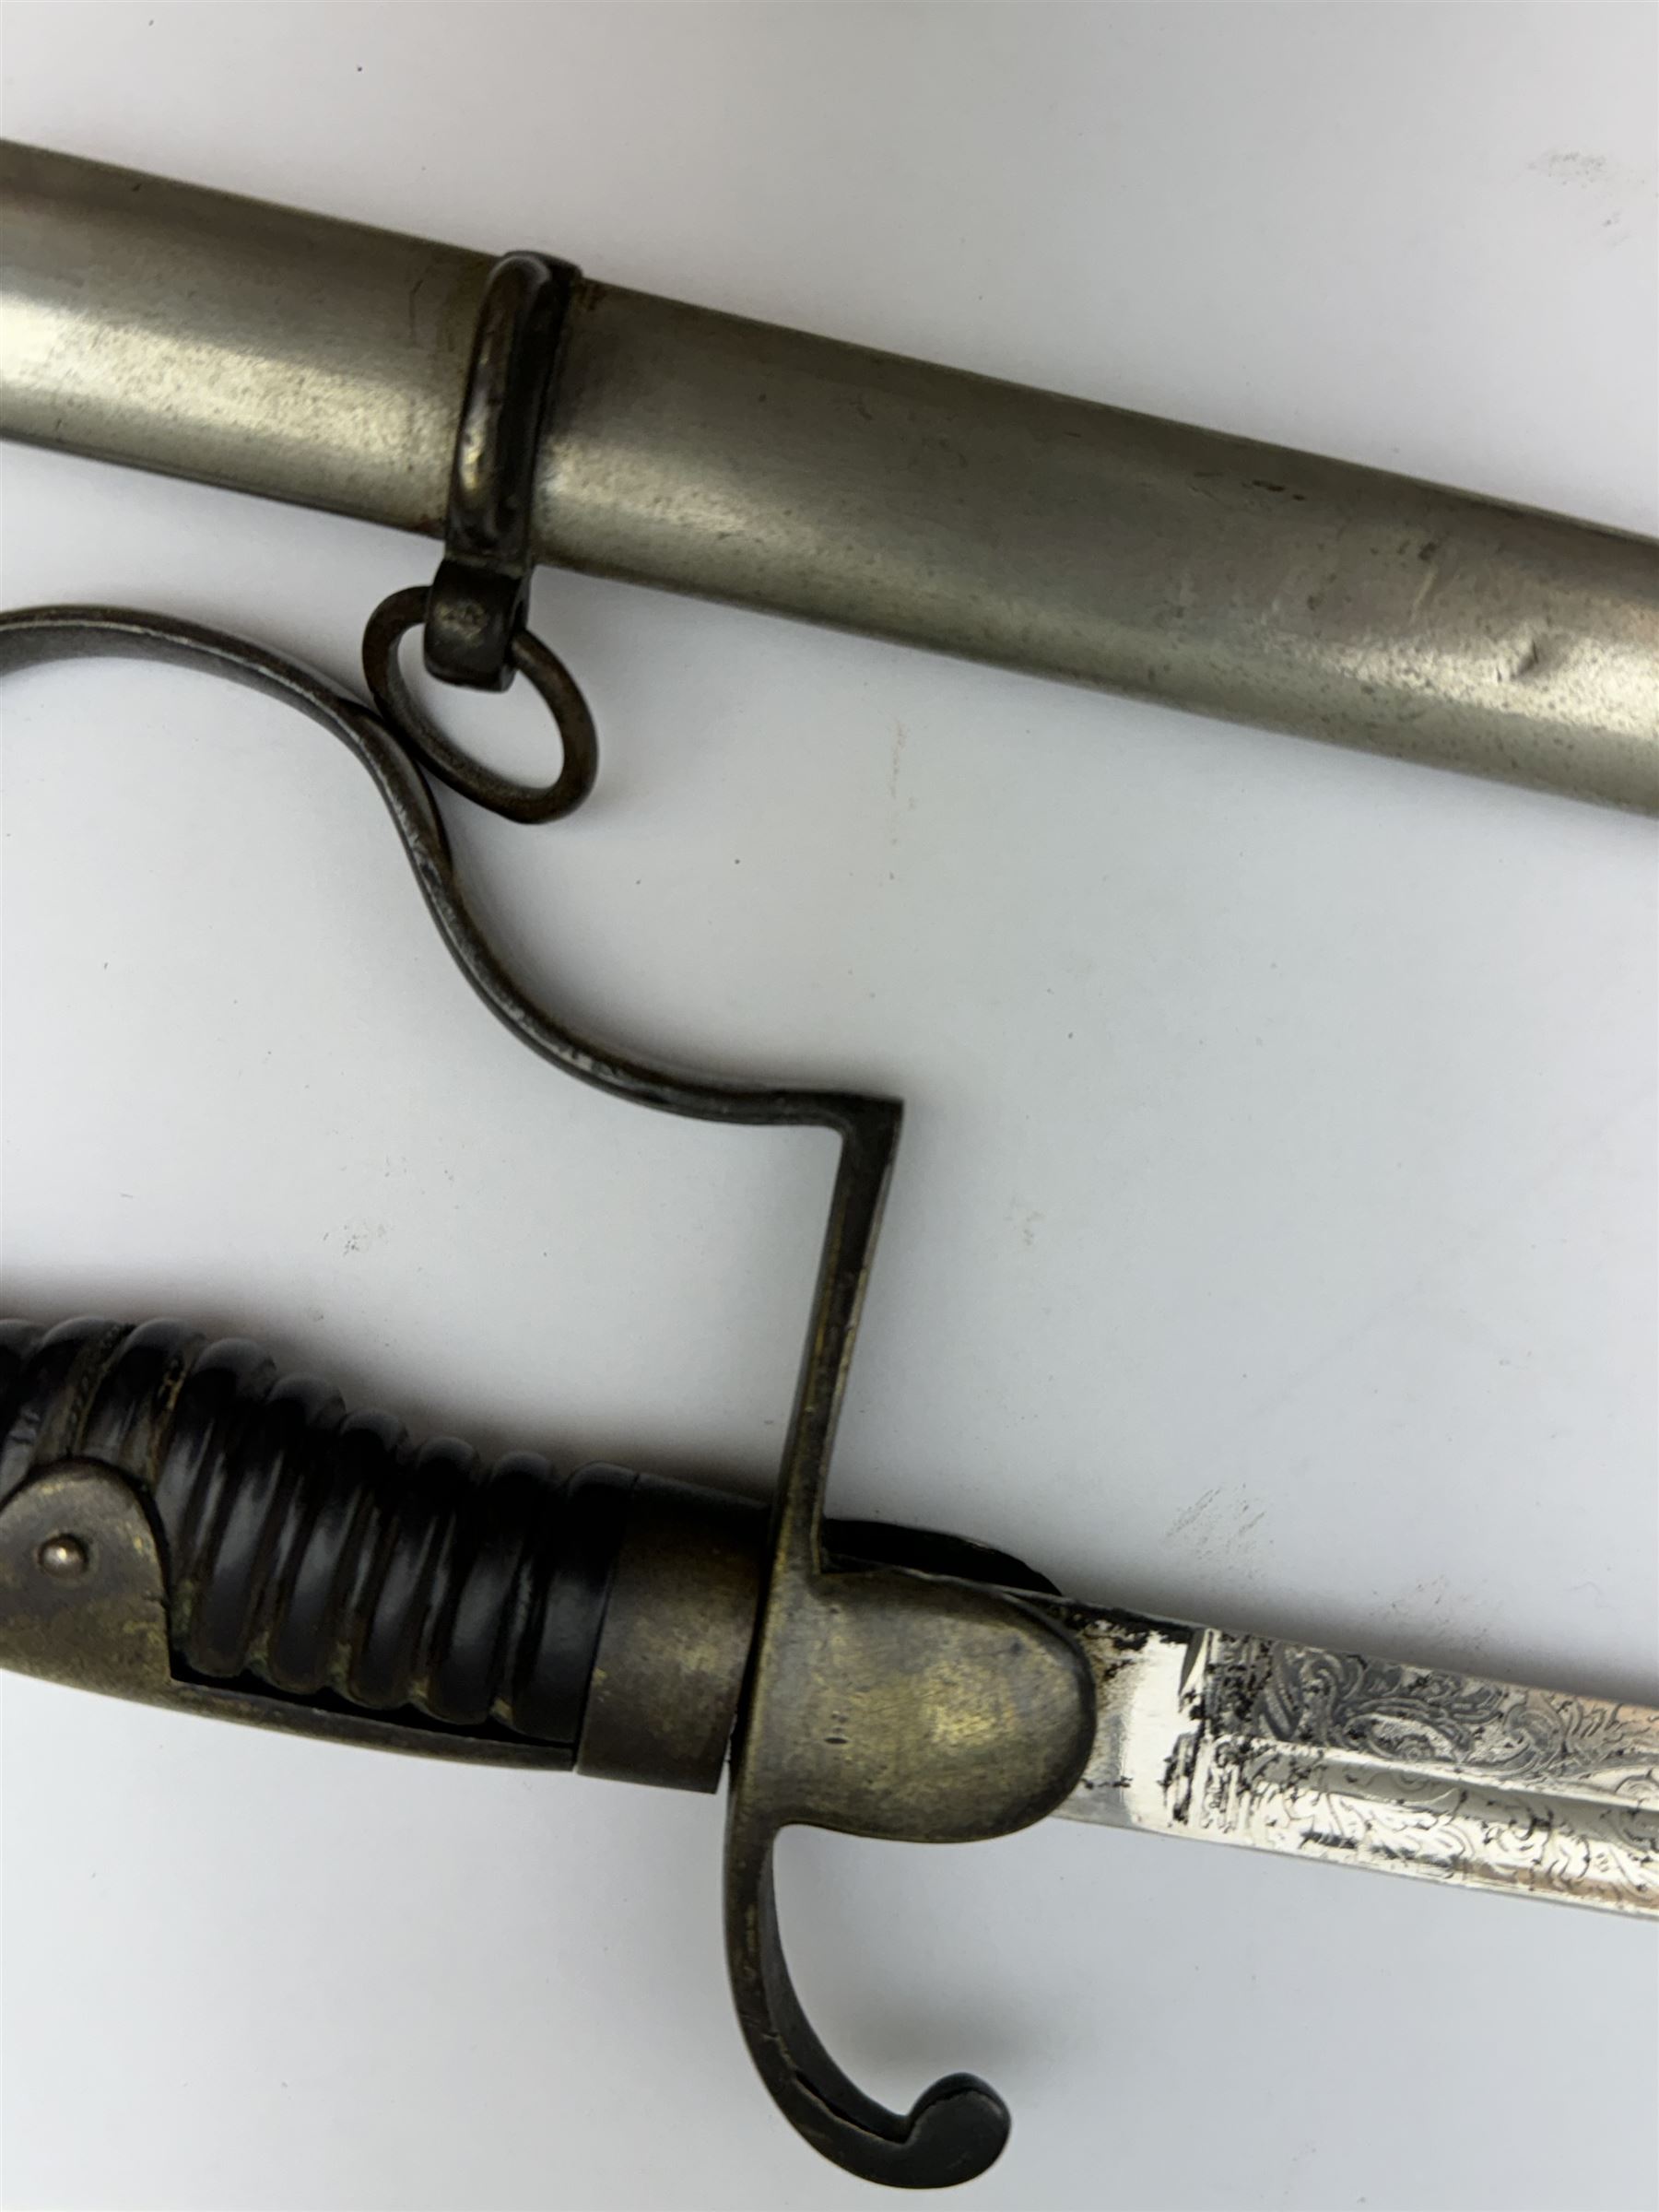 Ottoman/Turkish WW1 Period Infantry Officer's Short Sword - Image 4 of 6